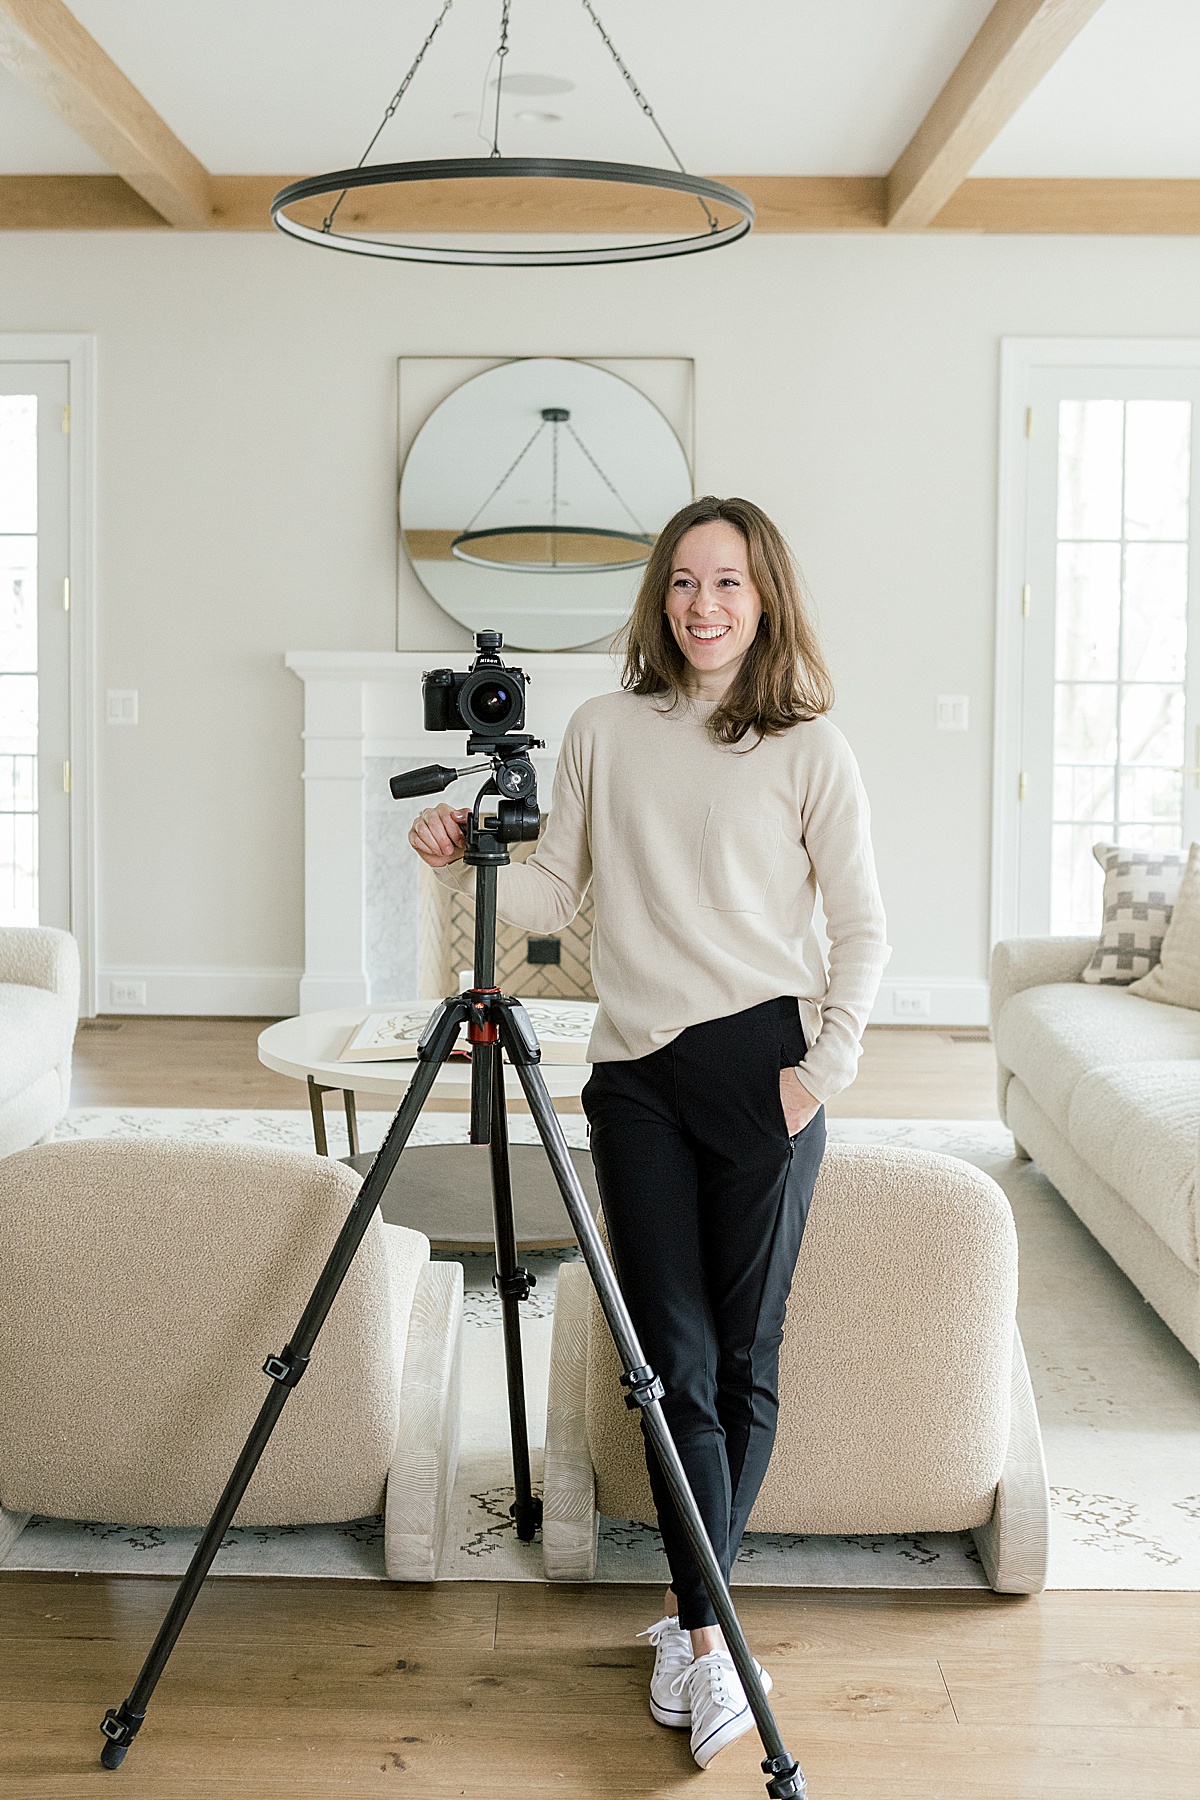 Brand session for Constance Gauthier, architecture & interior photographer | by Abby Grace